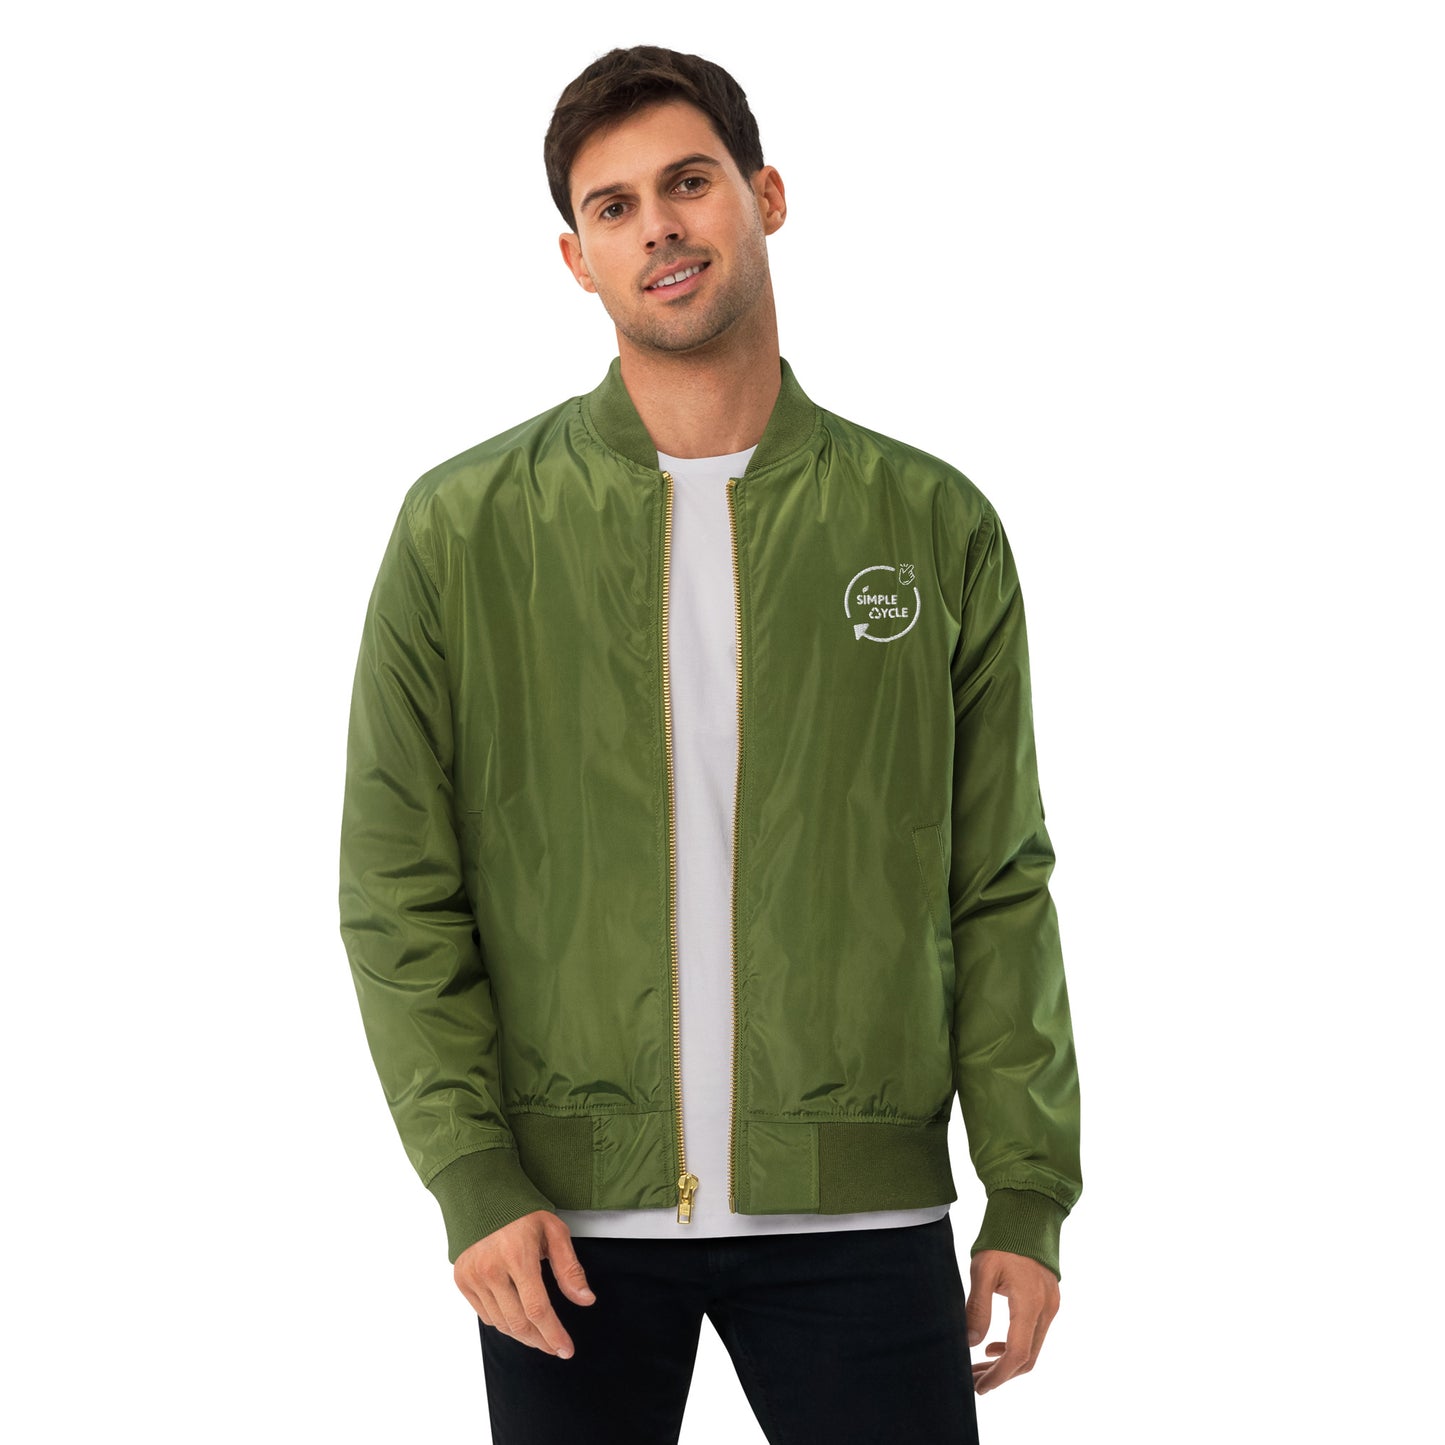 SimpleCycle Embroidered Premium Recycled Bomber Jacket green on a model